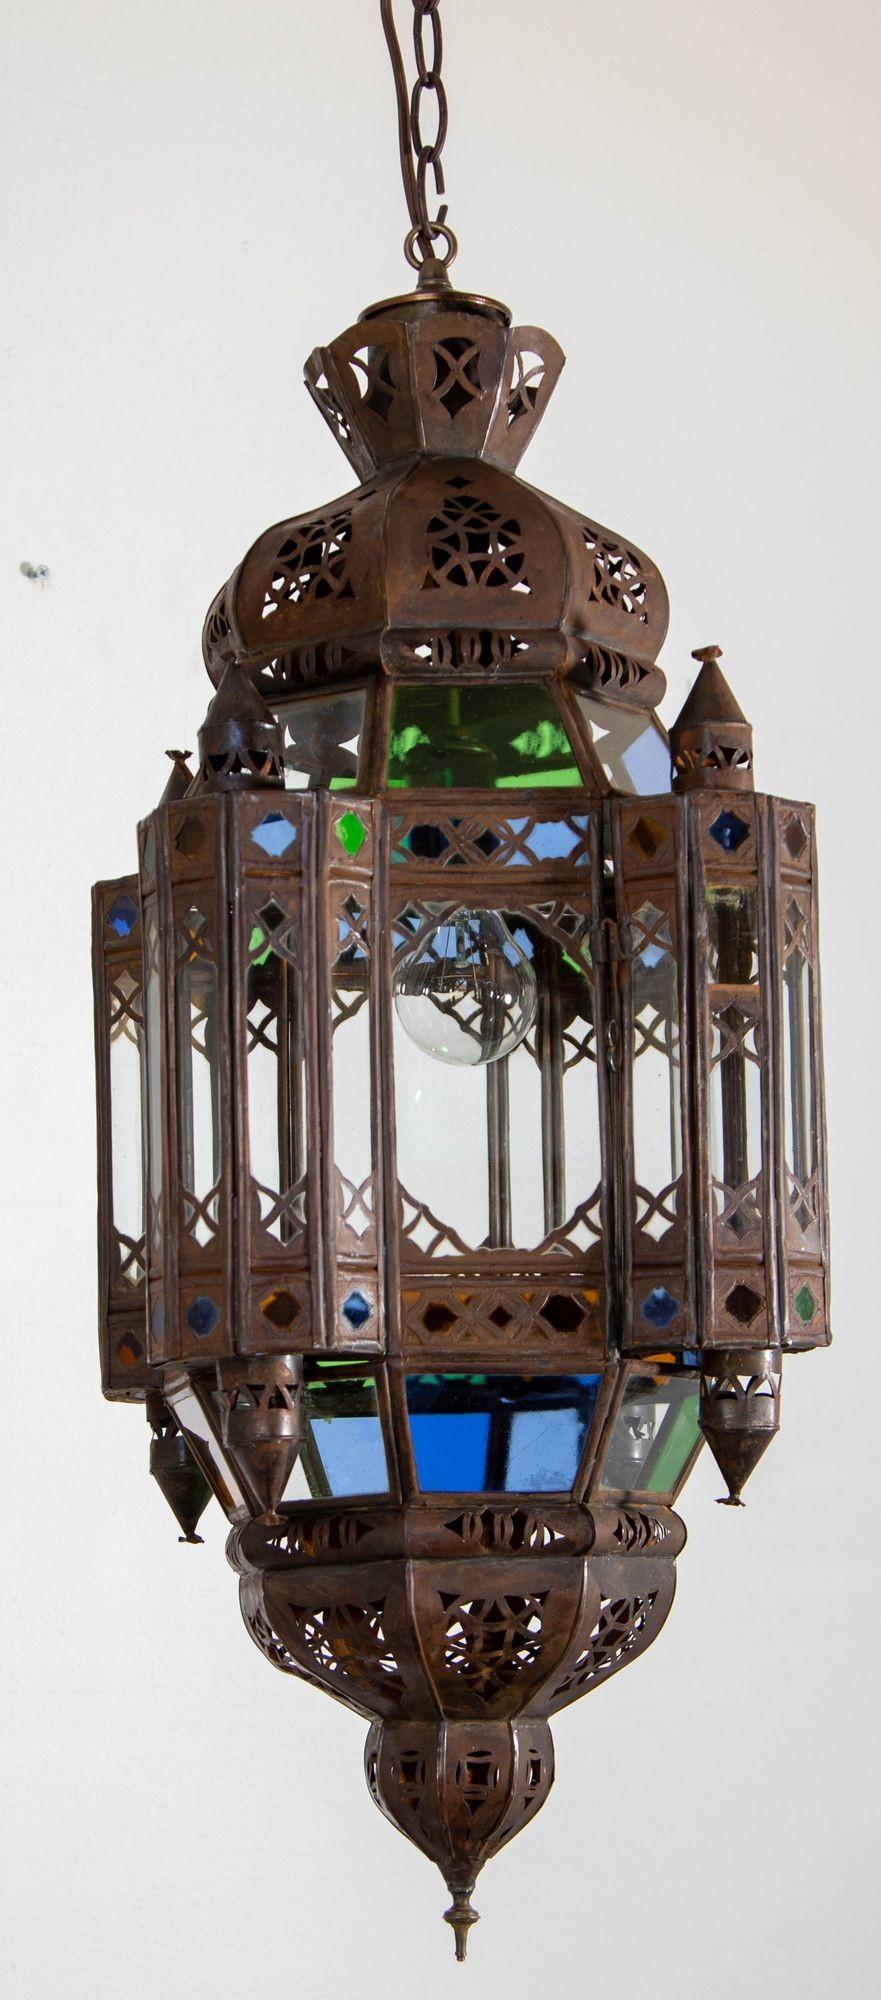 Vintage Moroccan Traditional Moorish clear glass and multicolor lantern.
Large Moroccan patinated metal and glass lantern, ceiling light Moorish pendant lantern.
Multicolor glass, amber, Blue, Green and clear, multifaceted and intricate filigree